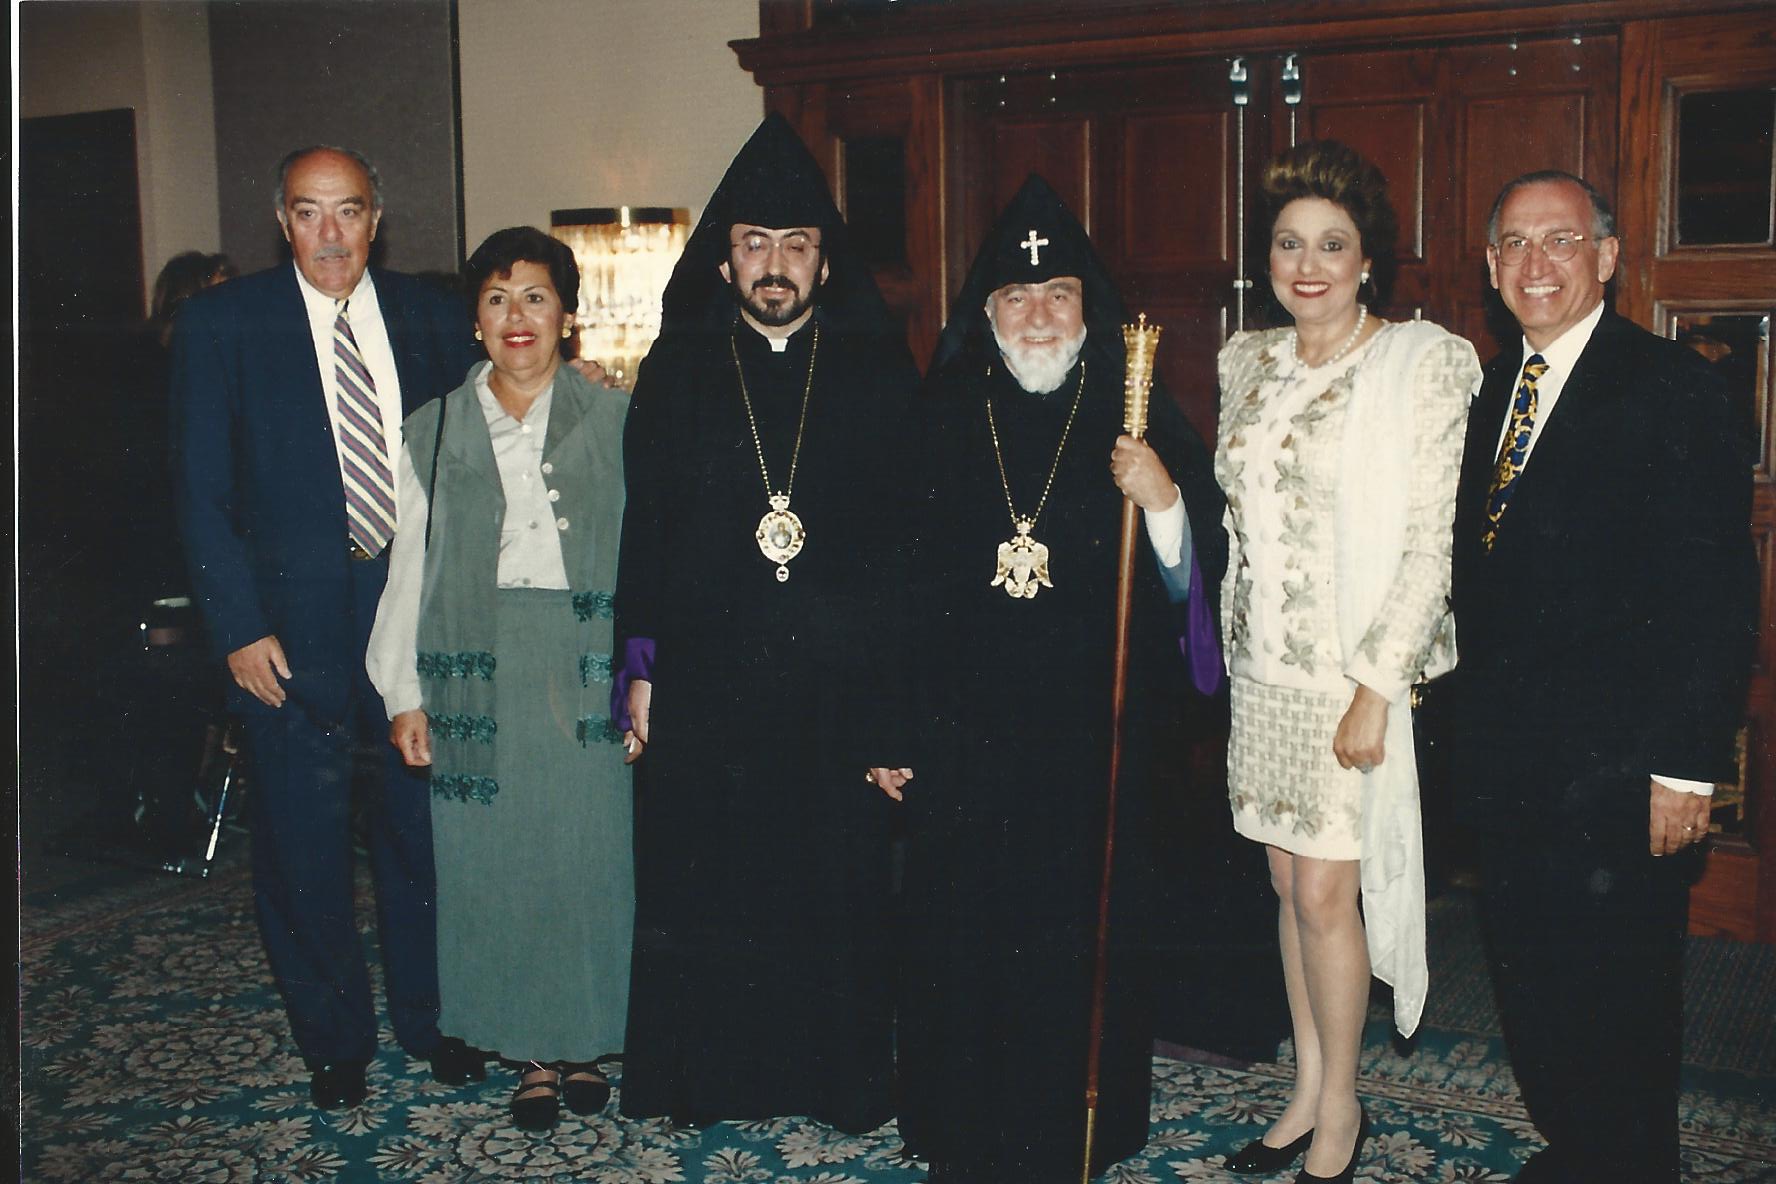 From L. to R. Mr. and Mrs. Arsen Hanamirian, Arch. Khajag Barsamian, His Holiness Karekin I and Dr. and Mrs. Raffy Hovanessian at St. David's Church in Florida